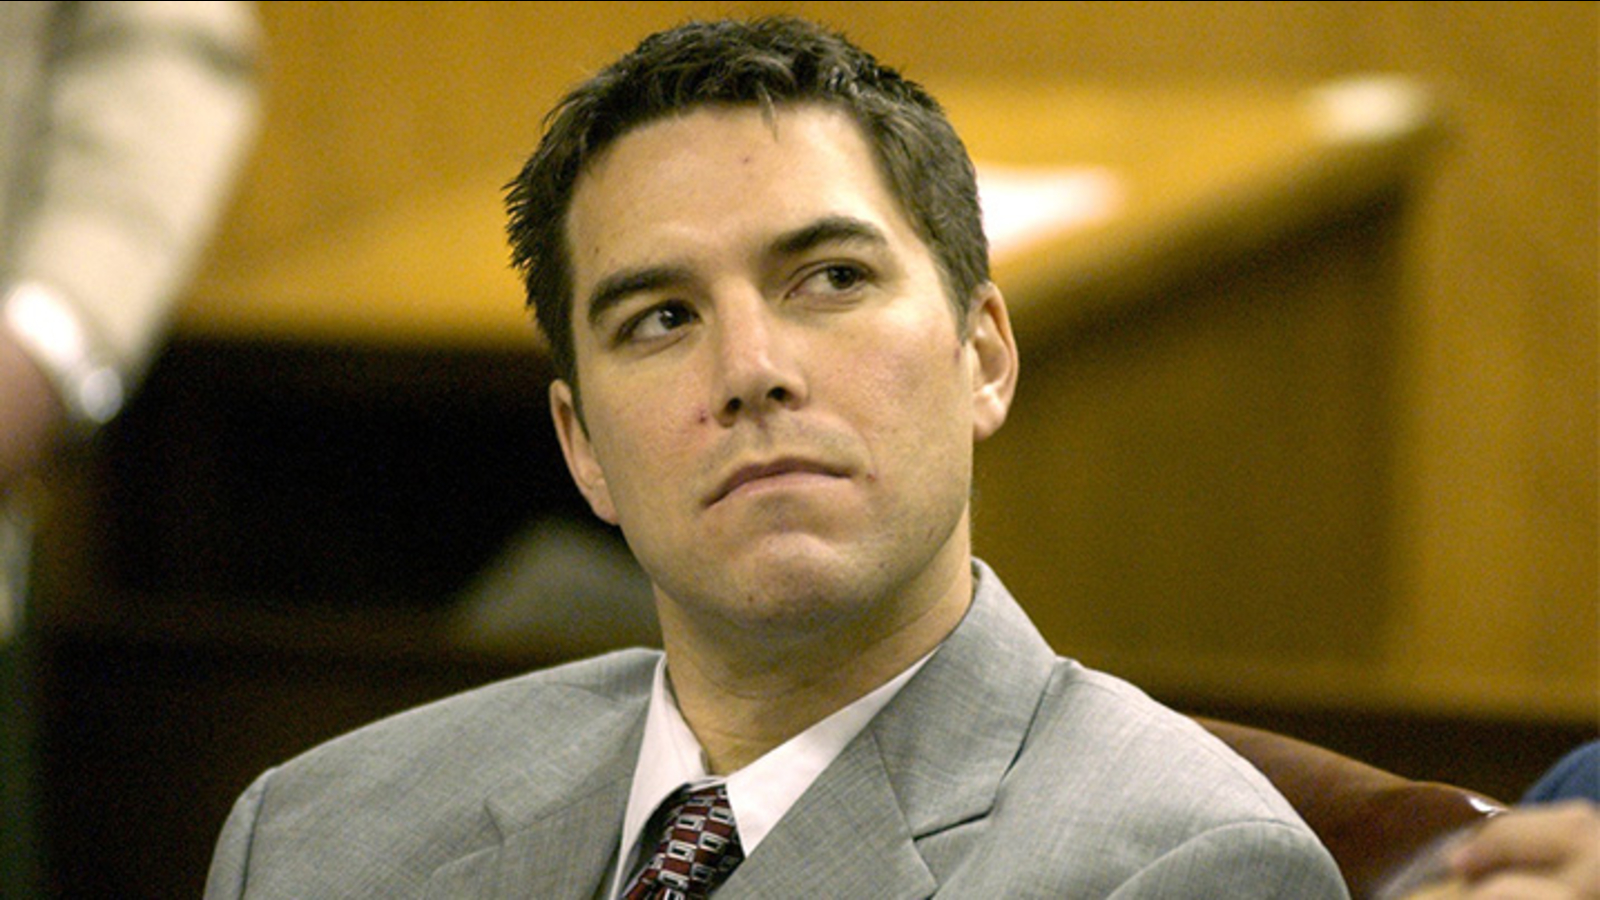 Inside Scott Peterson's Life In Prison - Current Status And Recent Developments